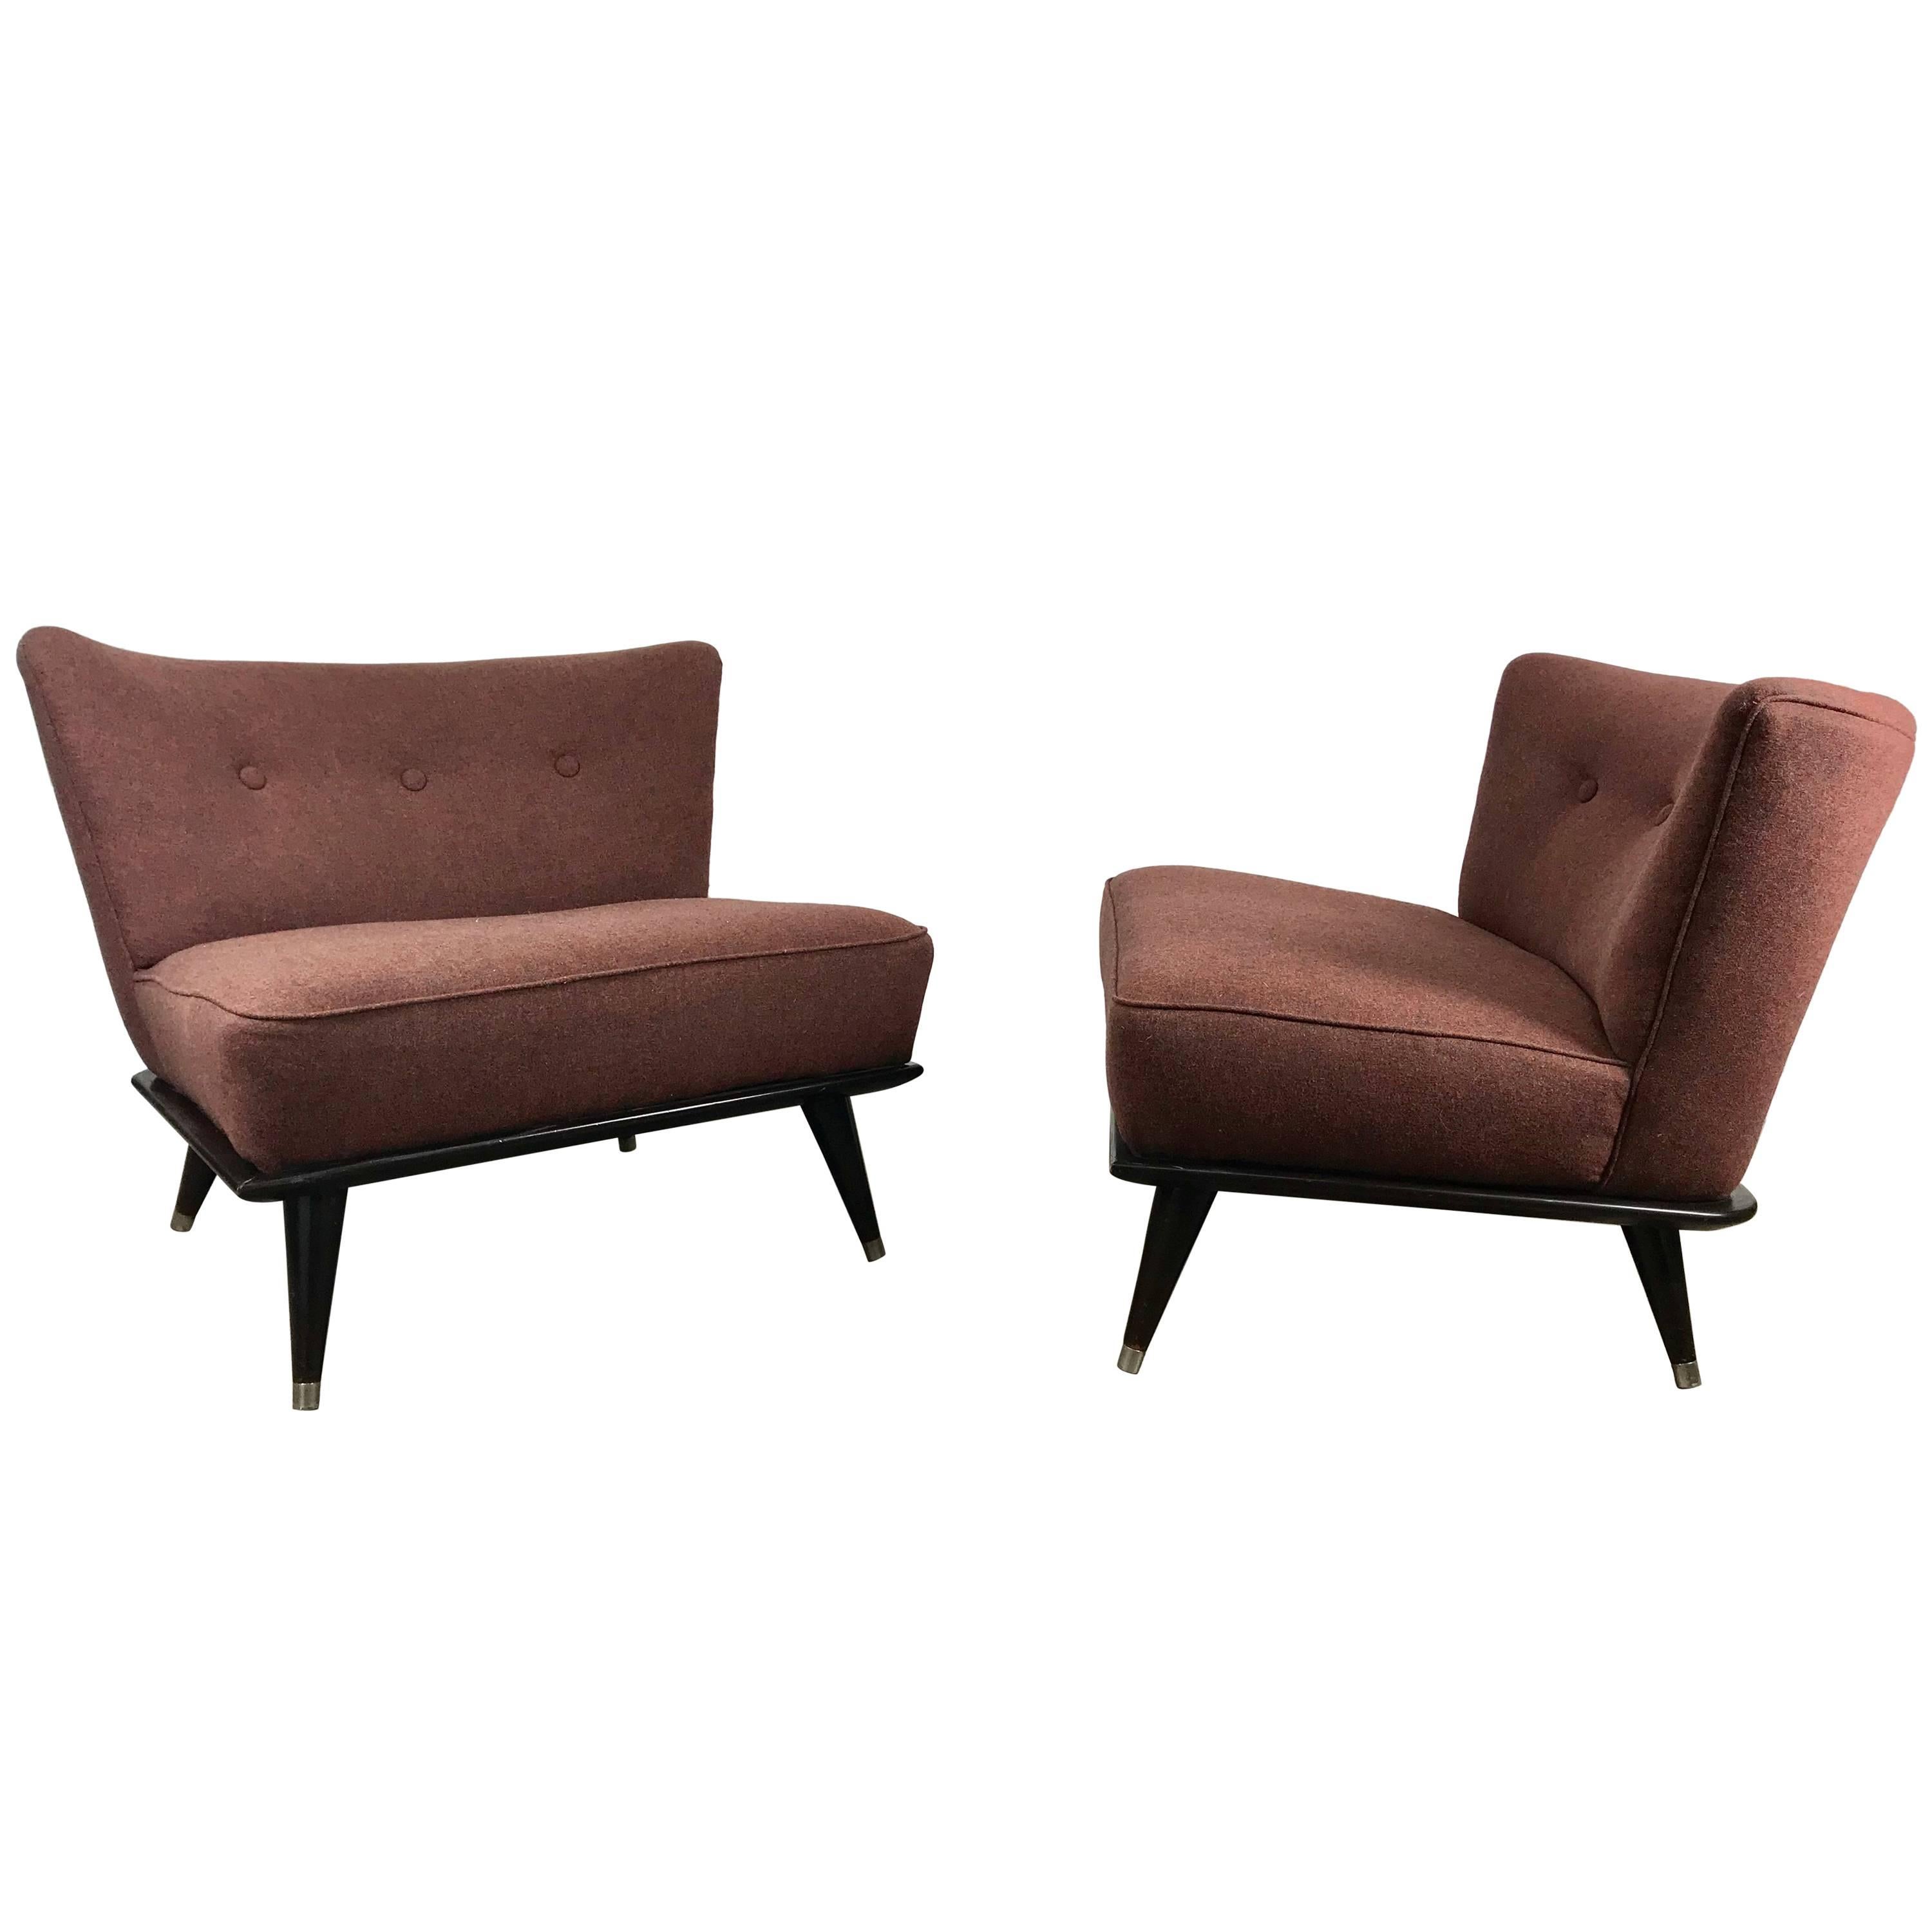 Stunning Pair of Modernist Slipper Chairs in the Manner of Gio Ponti